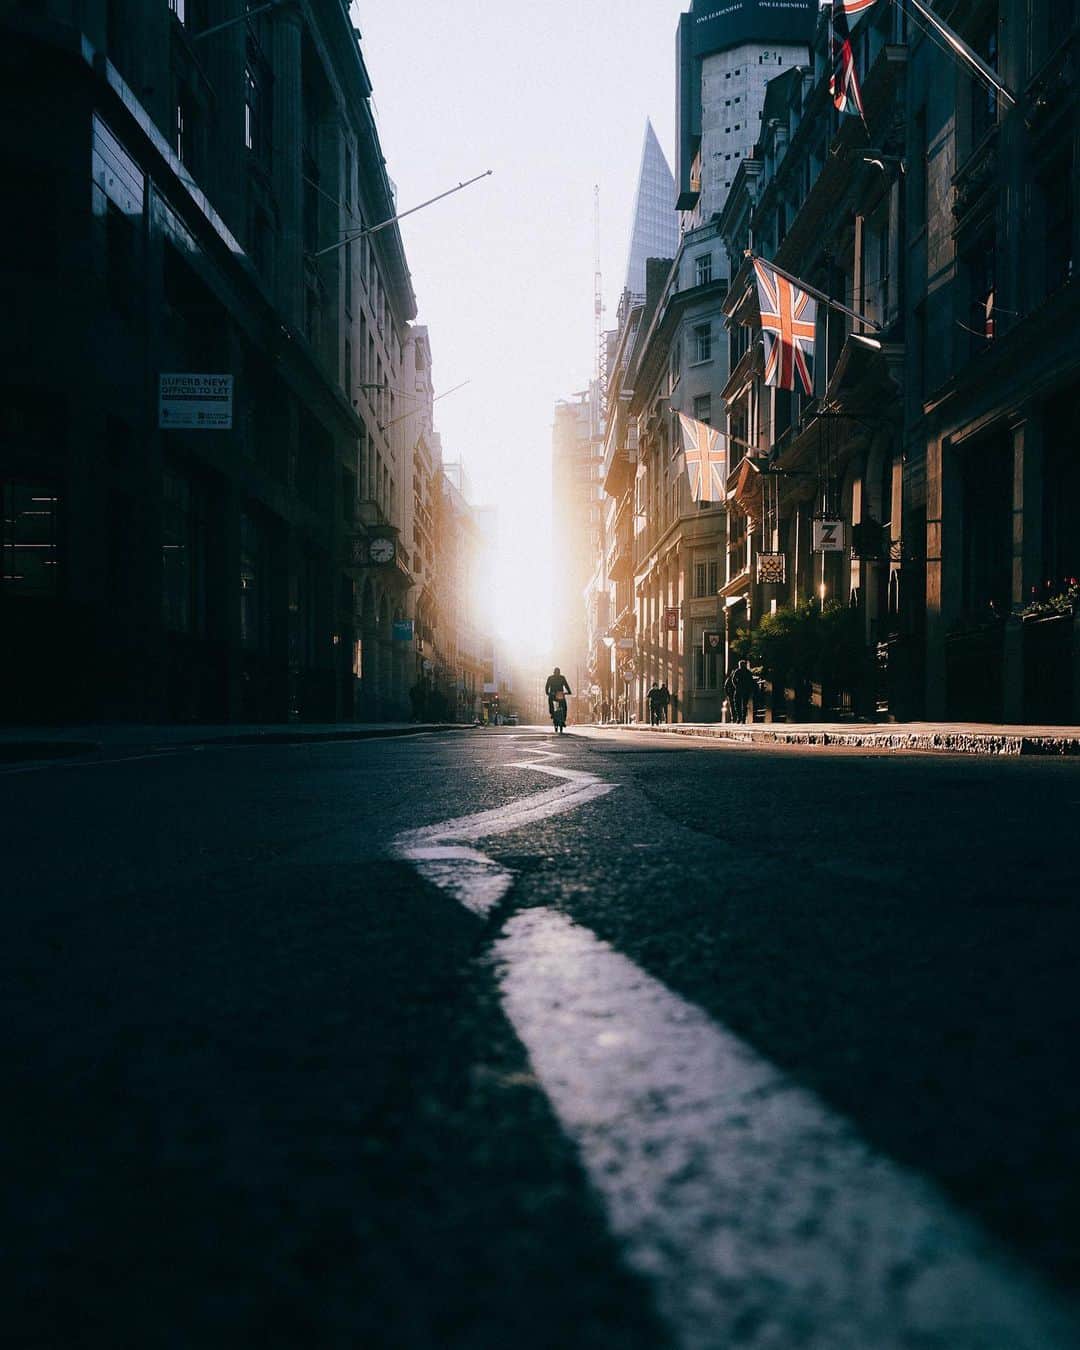 Thomas Kakarekoのインスタグラム：「waking streets, quiet ride In the early morning, a cyclist cruises London's deserted streets, caught in the contrasting play of light and shadow as the city starts to awaken. #london」